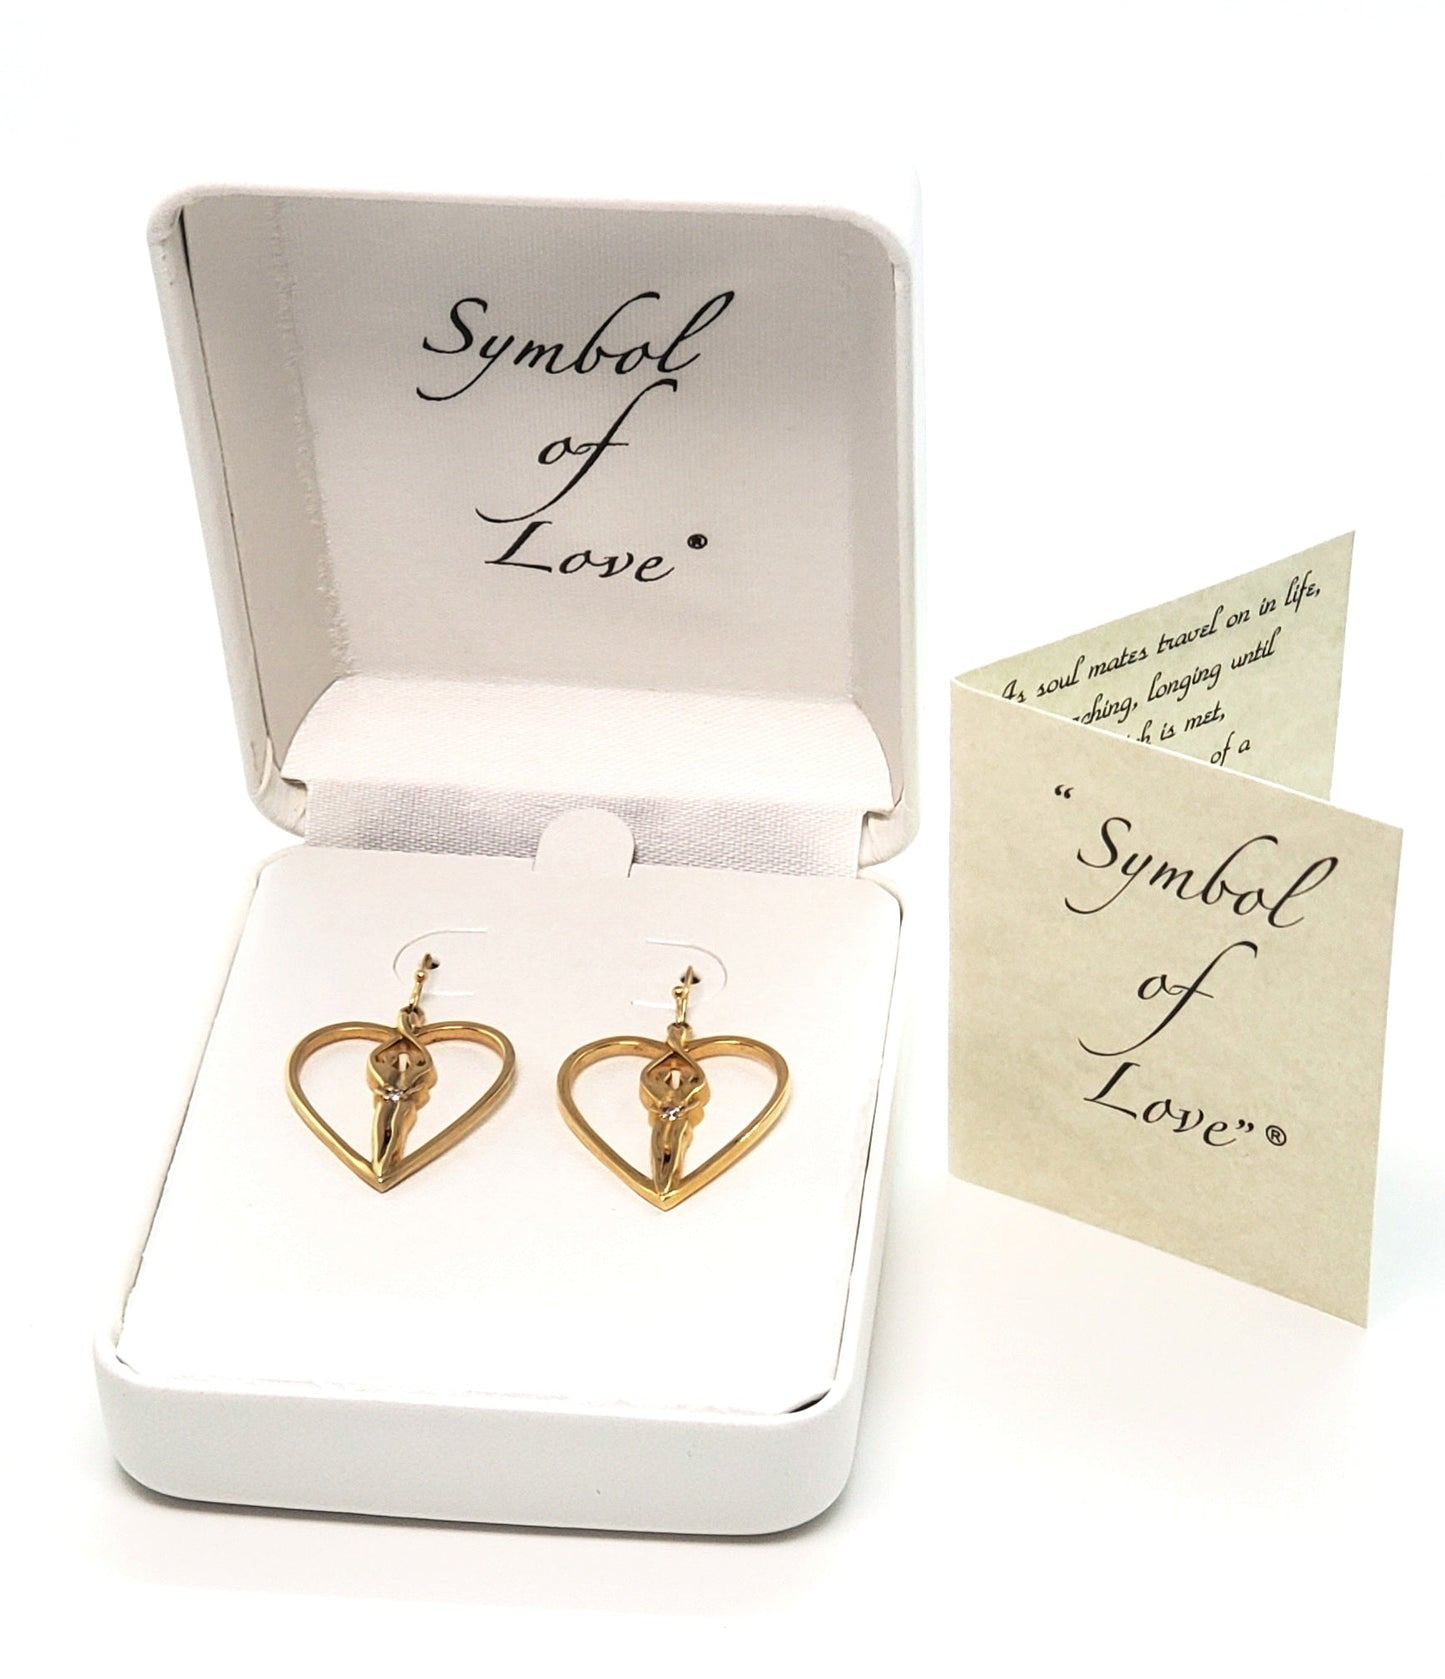 Soulmate Heart Earrings, 1" by ¾", .925 Genuine Sterling Silver with 14kt. Gold Overlay, Ear Wire, Amethyst Cubic Zirconia